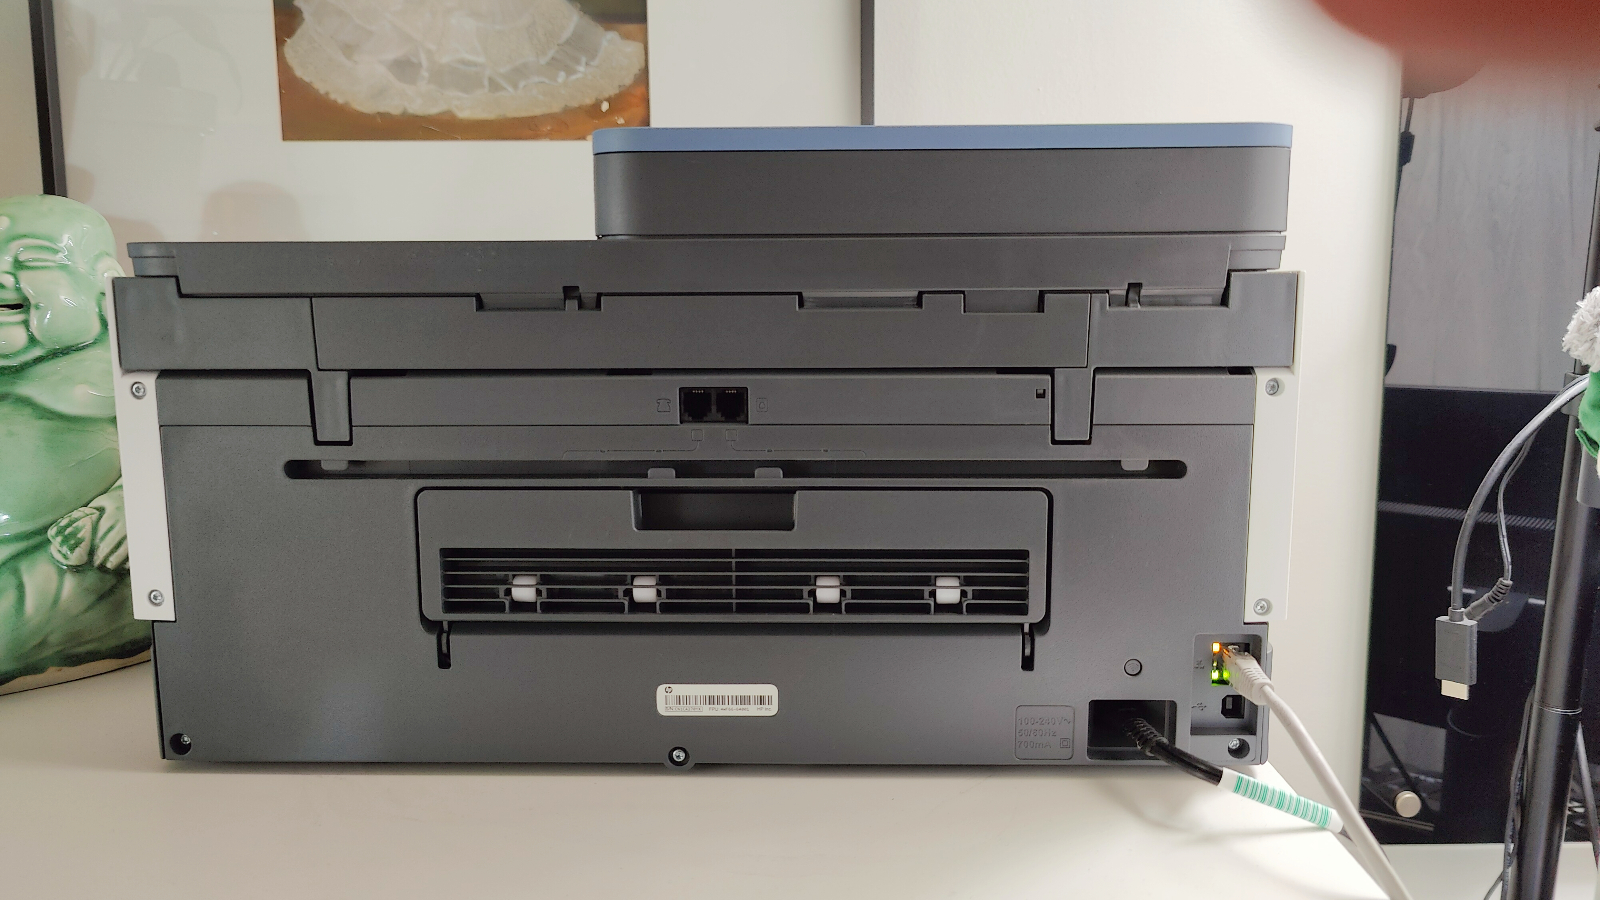 HP Smart Tank 7602 All-in-One printer review